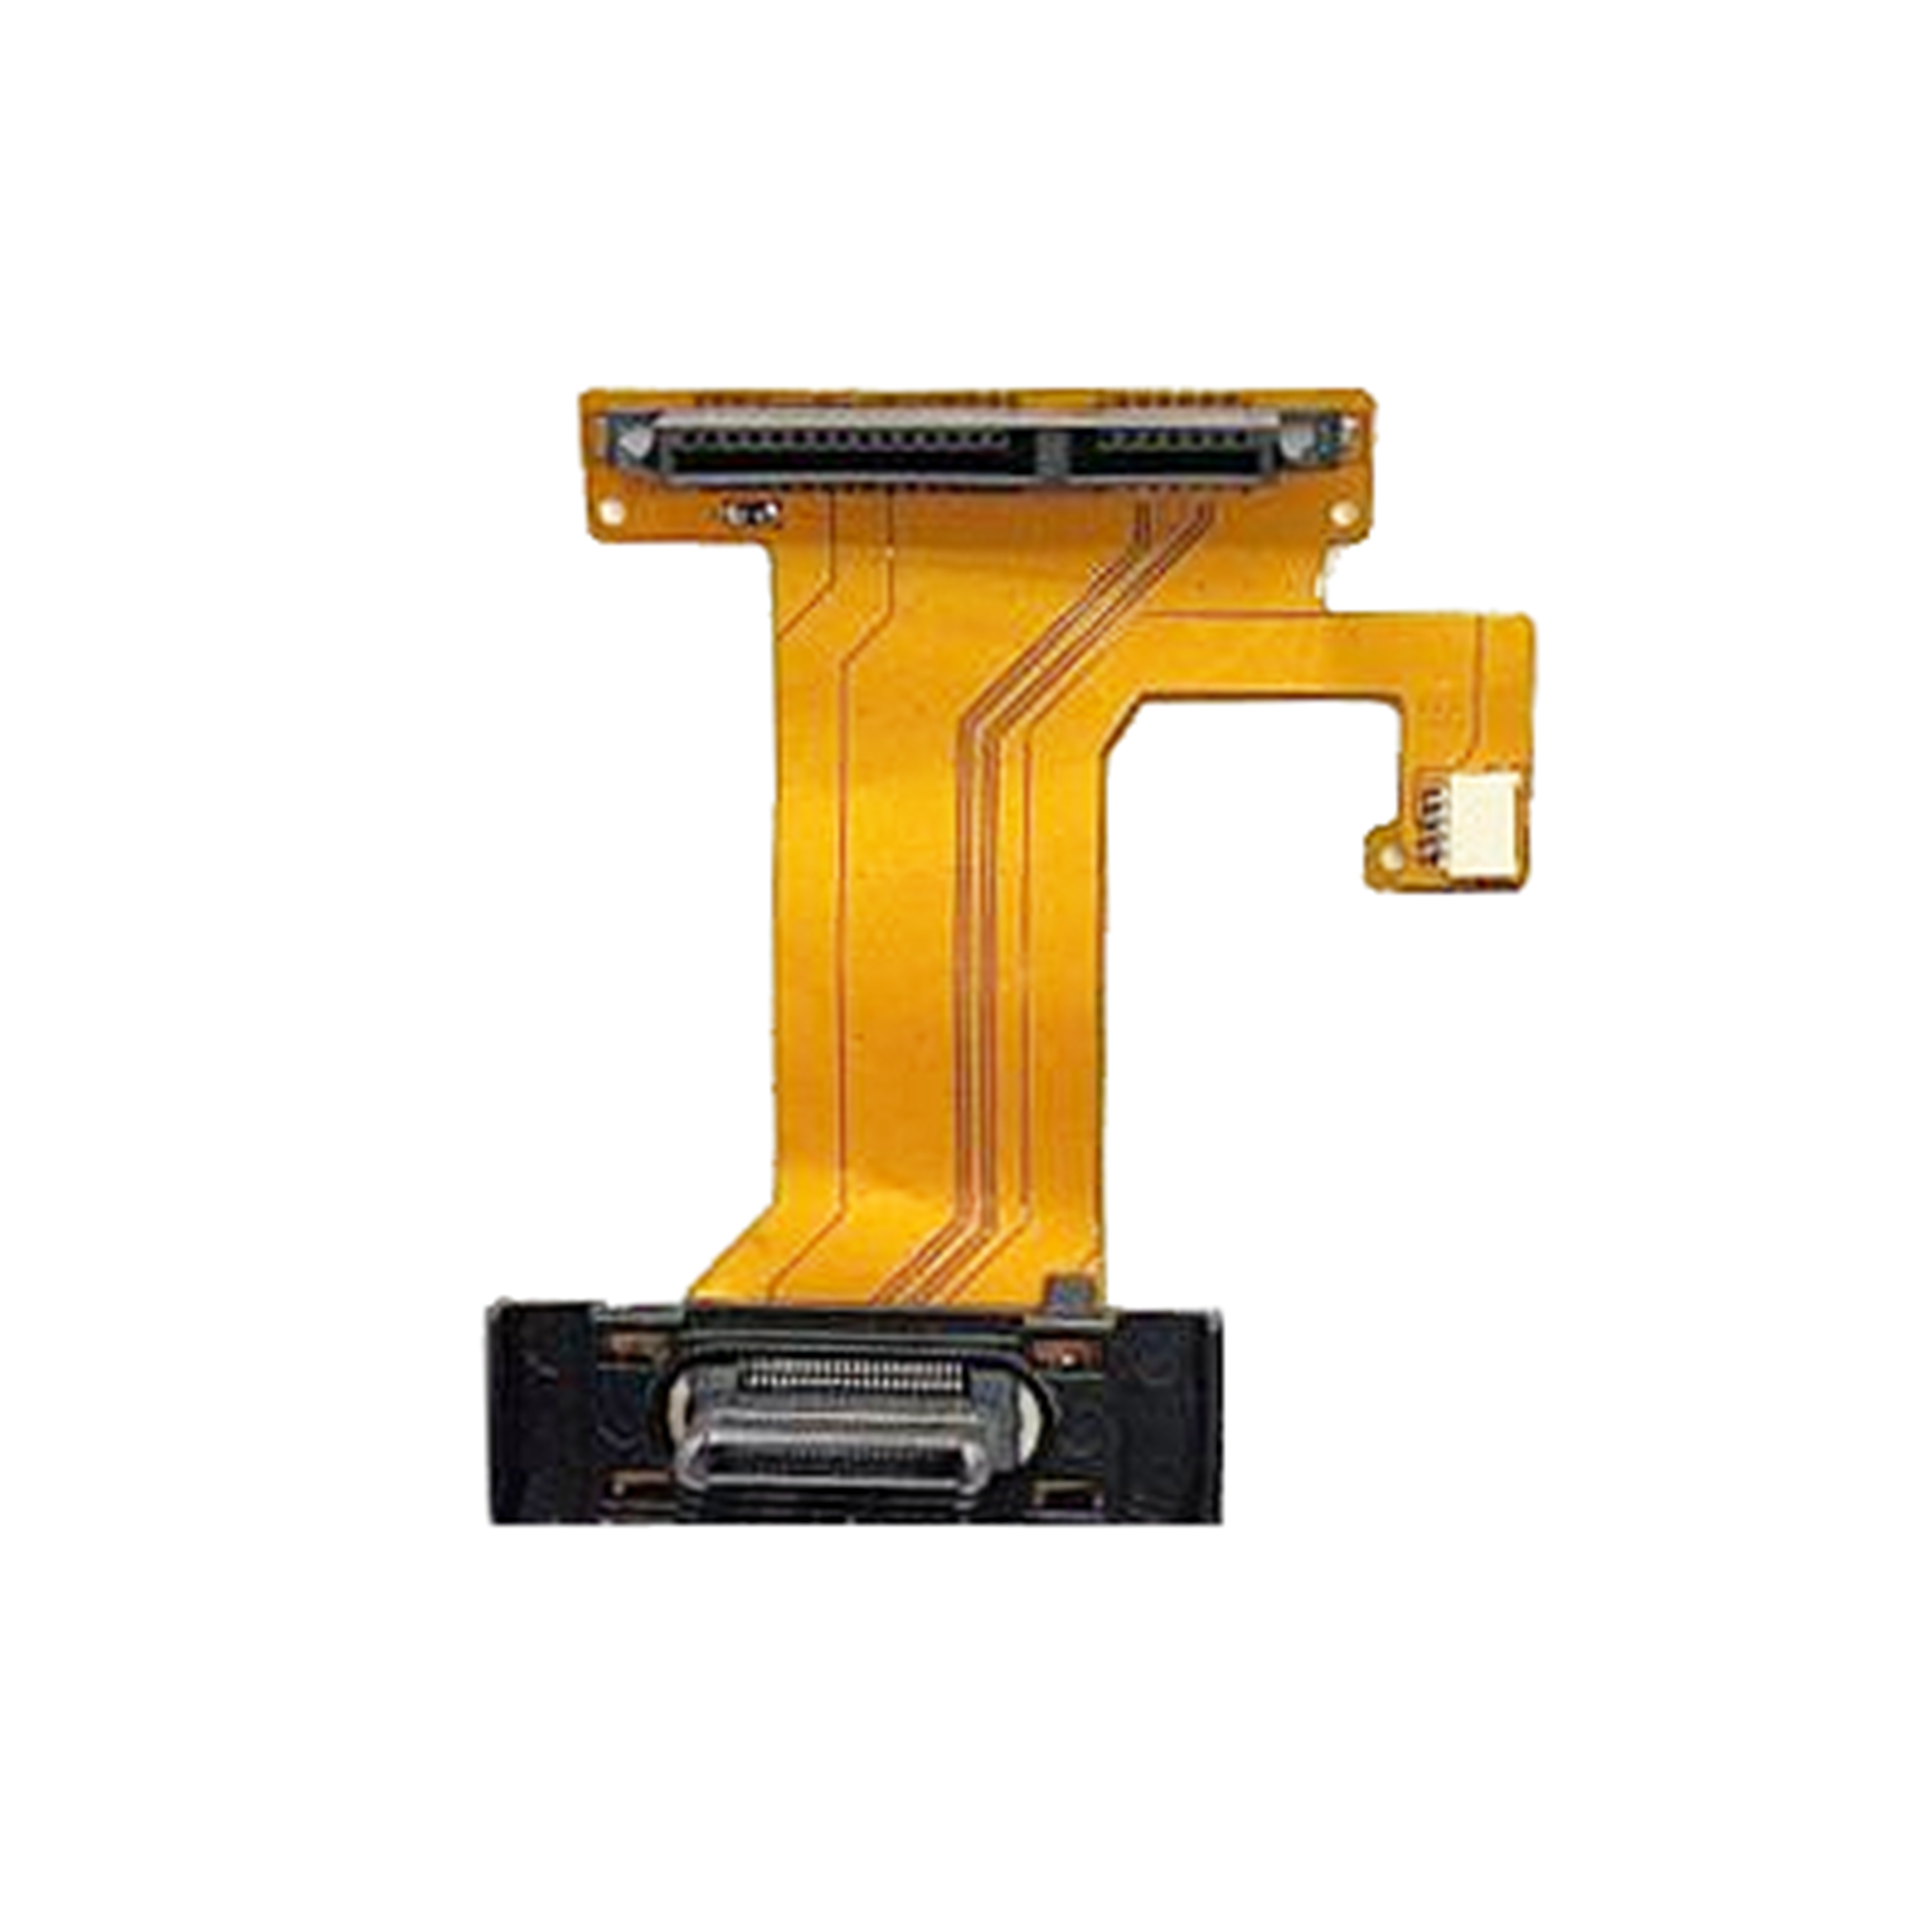 HDD Caddy with SATA Connector Ribbon Cable and Impact Protection Pack Part# DFWV99A0120 | N3CAYYY00068 for Panasonic ToughBook CF-52